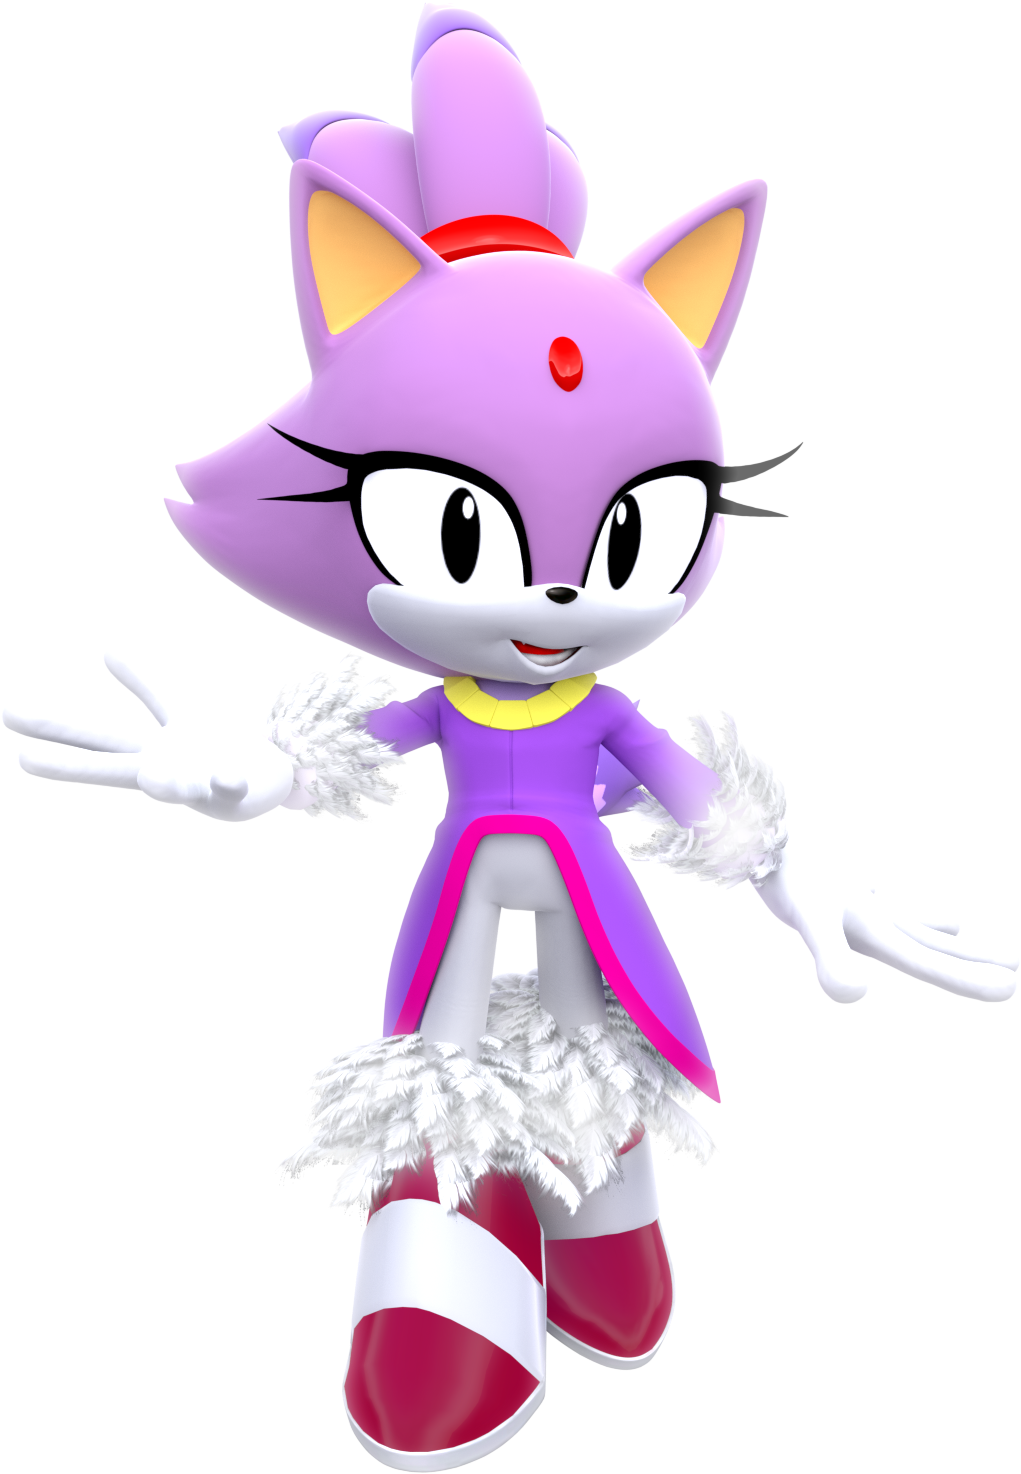 Download Best Blaze The Cat Wallpaper On Hipwallpaper Awesome PNG Image  with No Background  PNGkeycom